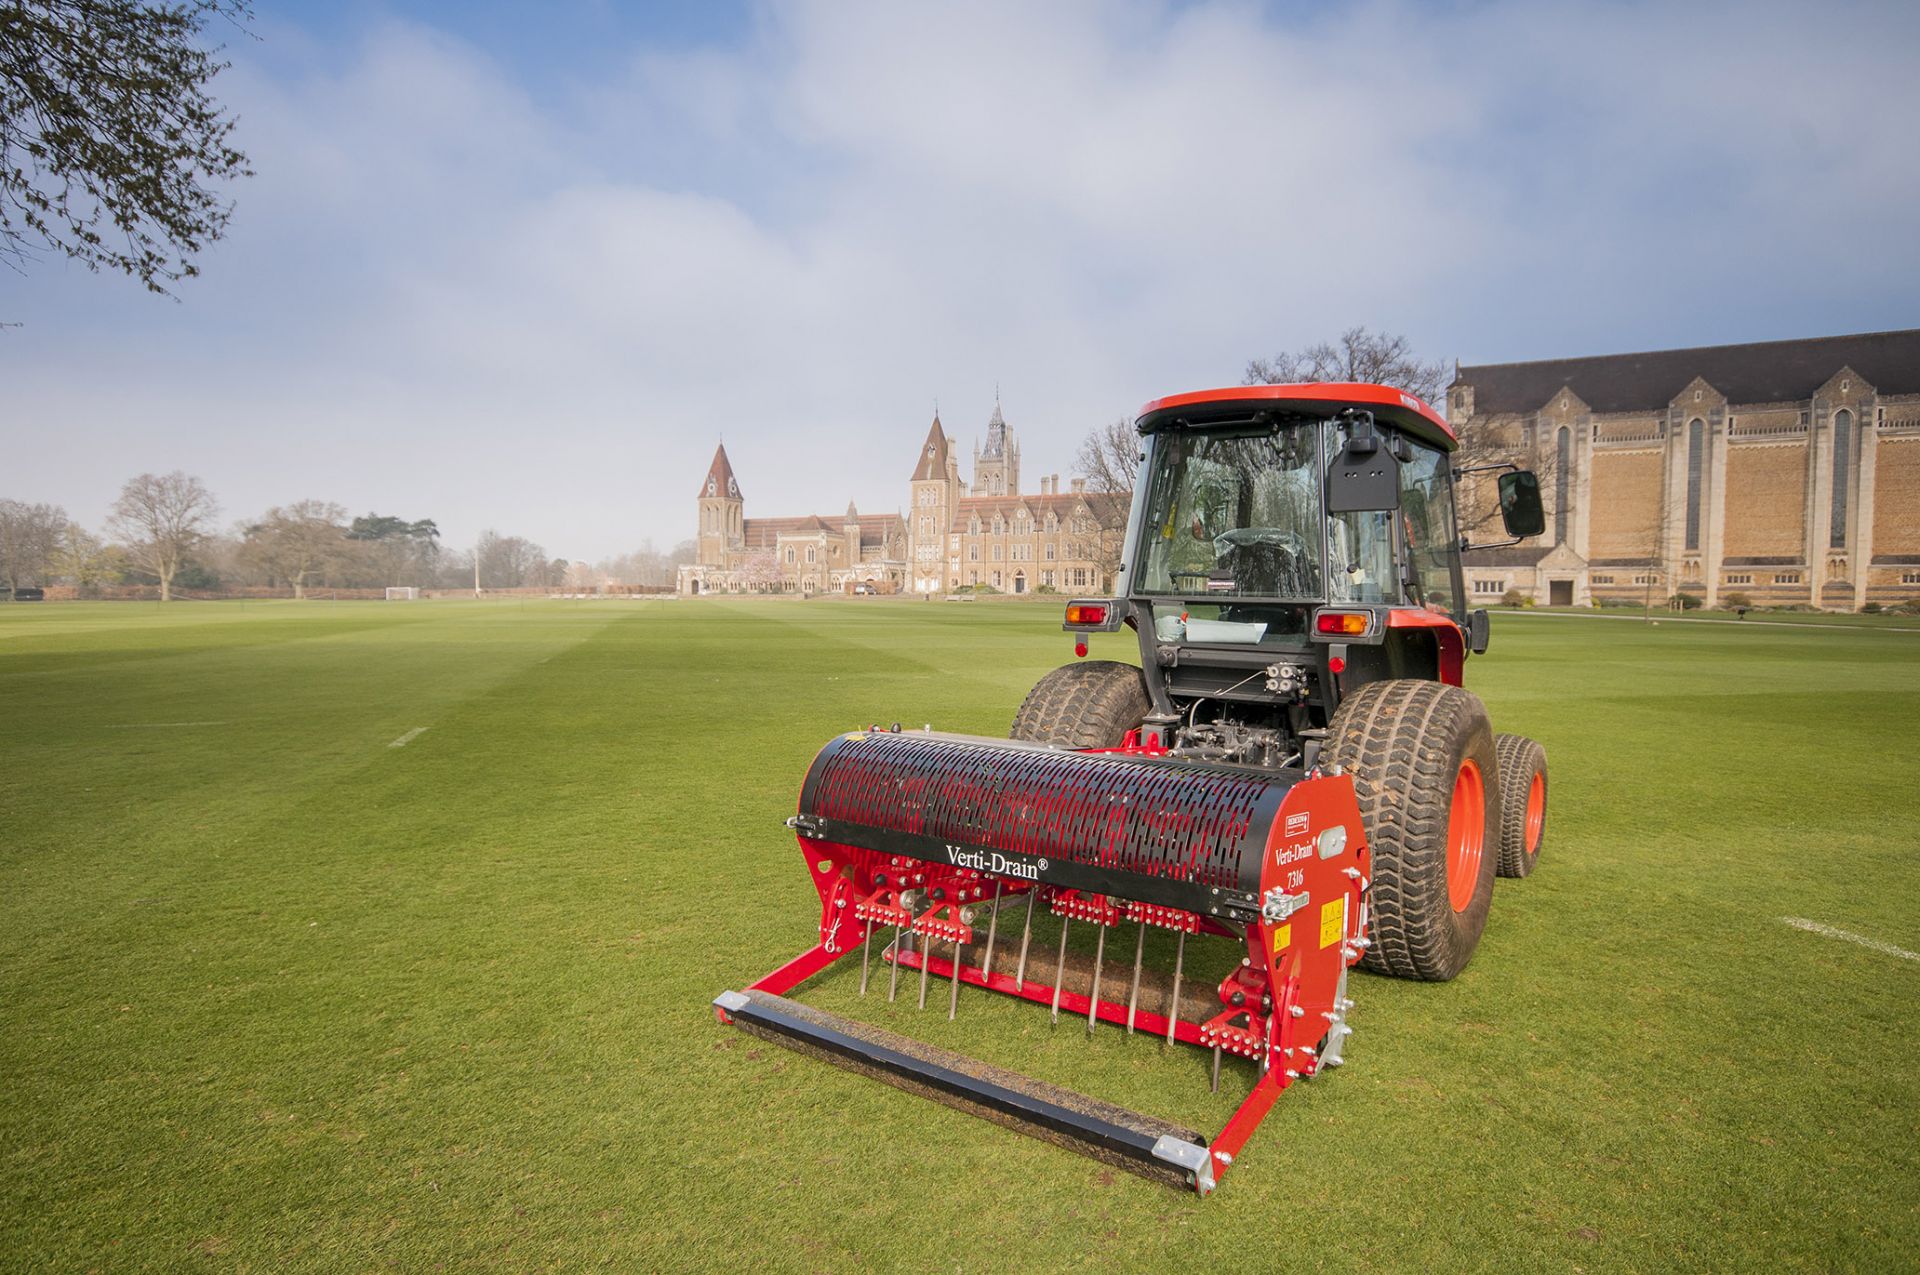 Since introducing the ground-breaking Verti-Drain® in 1980, Redexim has become and remained the benchmark in sports turf equipment regarding innovative design, craftmanship and heavy duty construction.